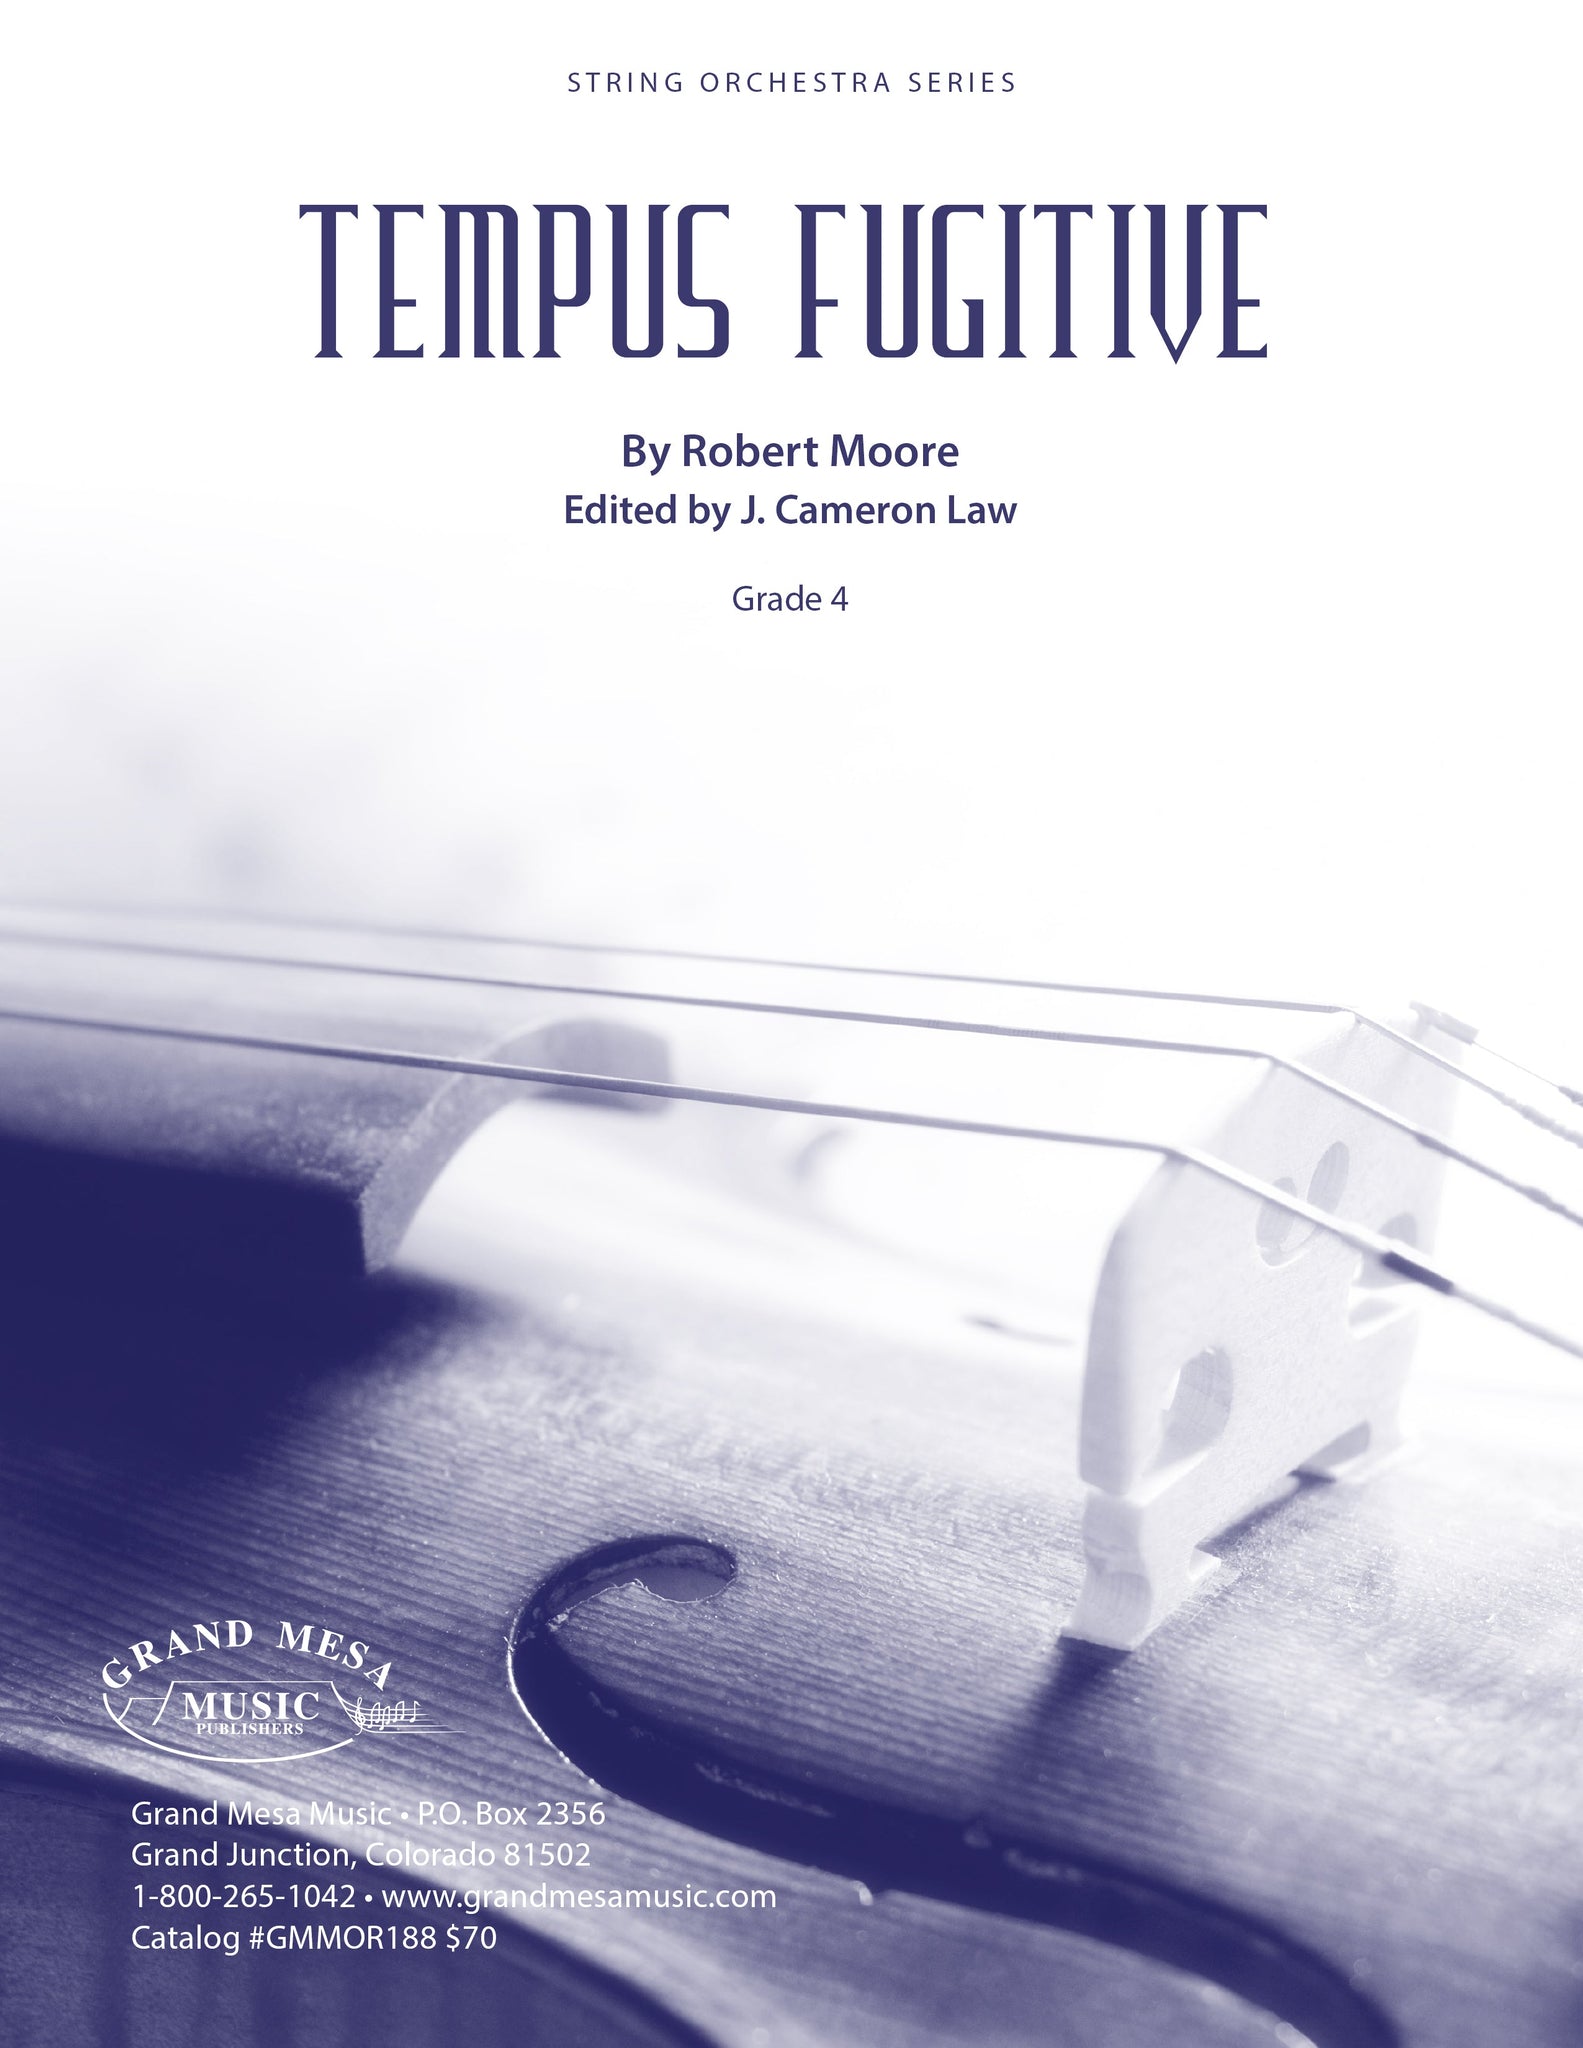 Strings sheet music cover of Tempus Fugitive, composed by Robert Moore.